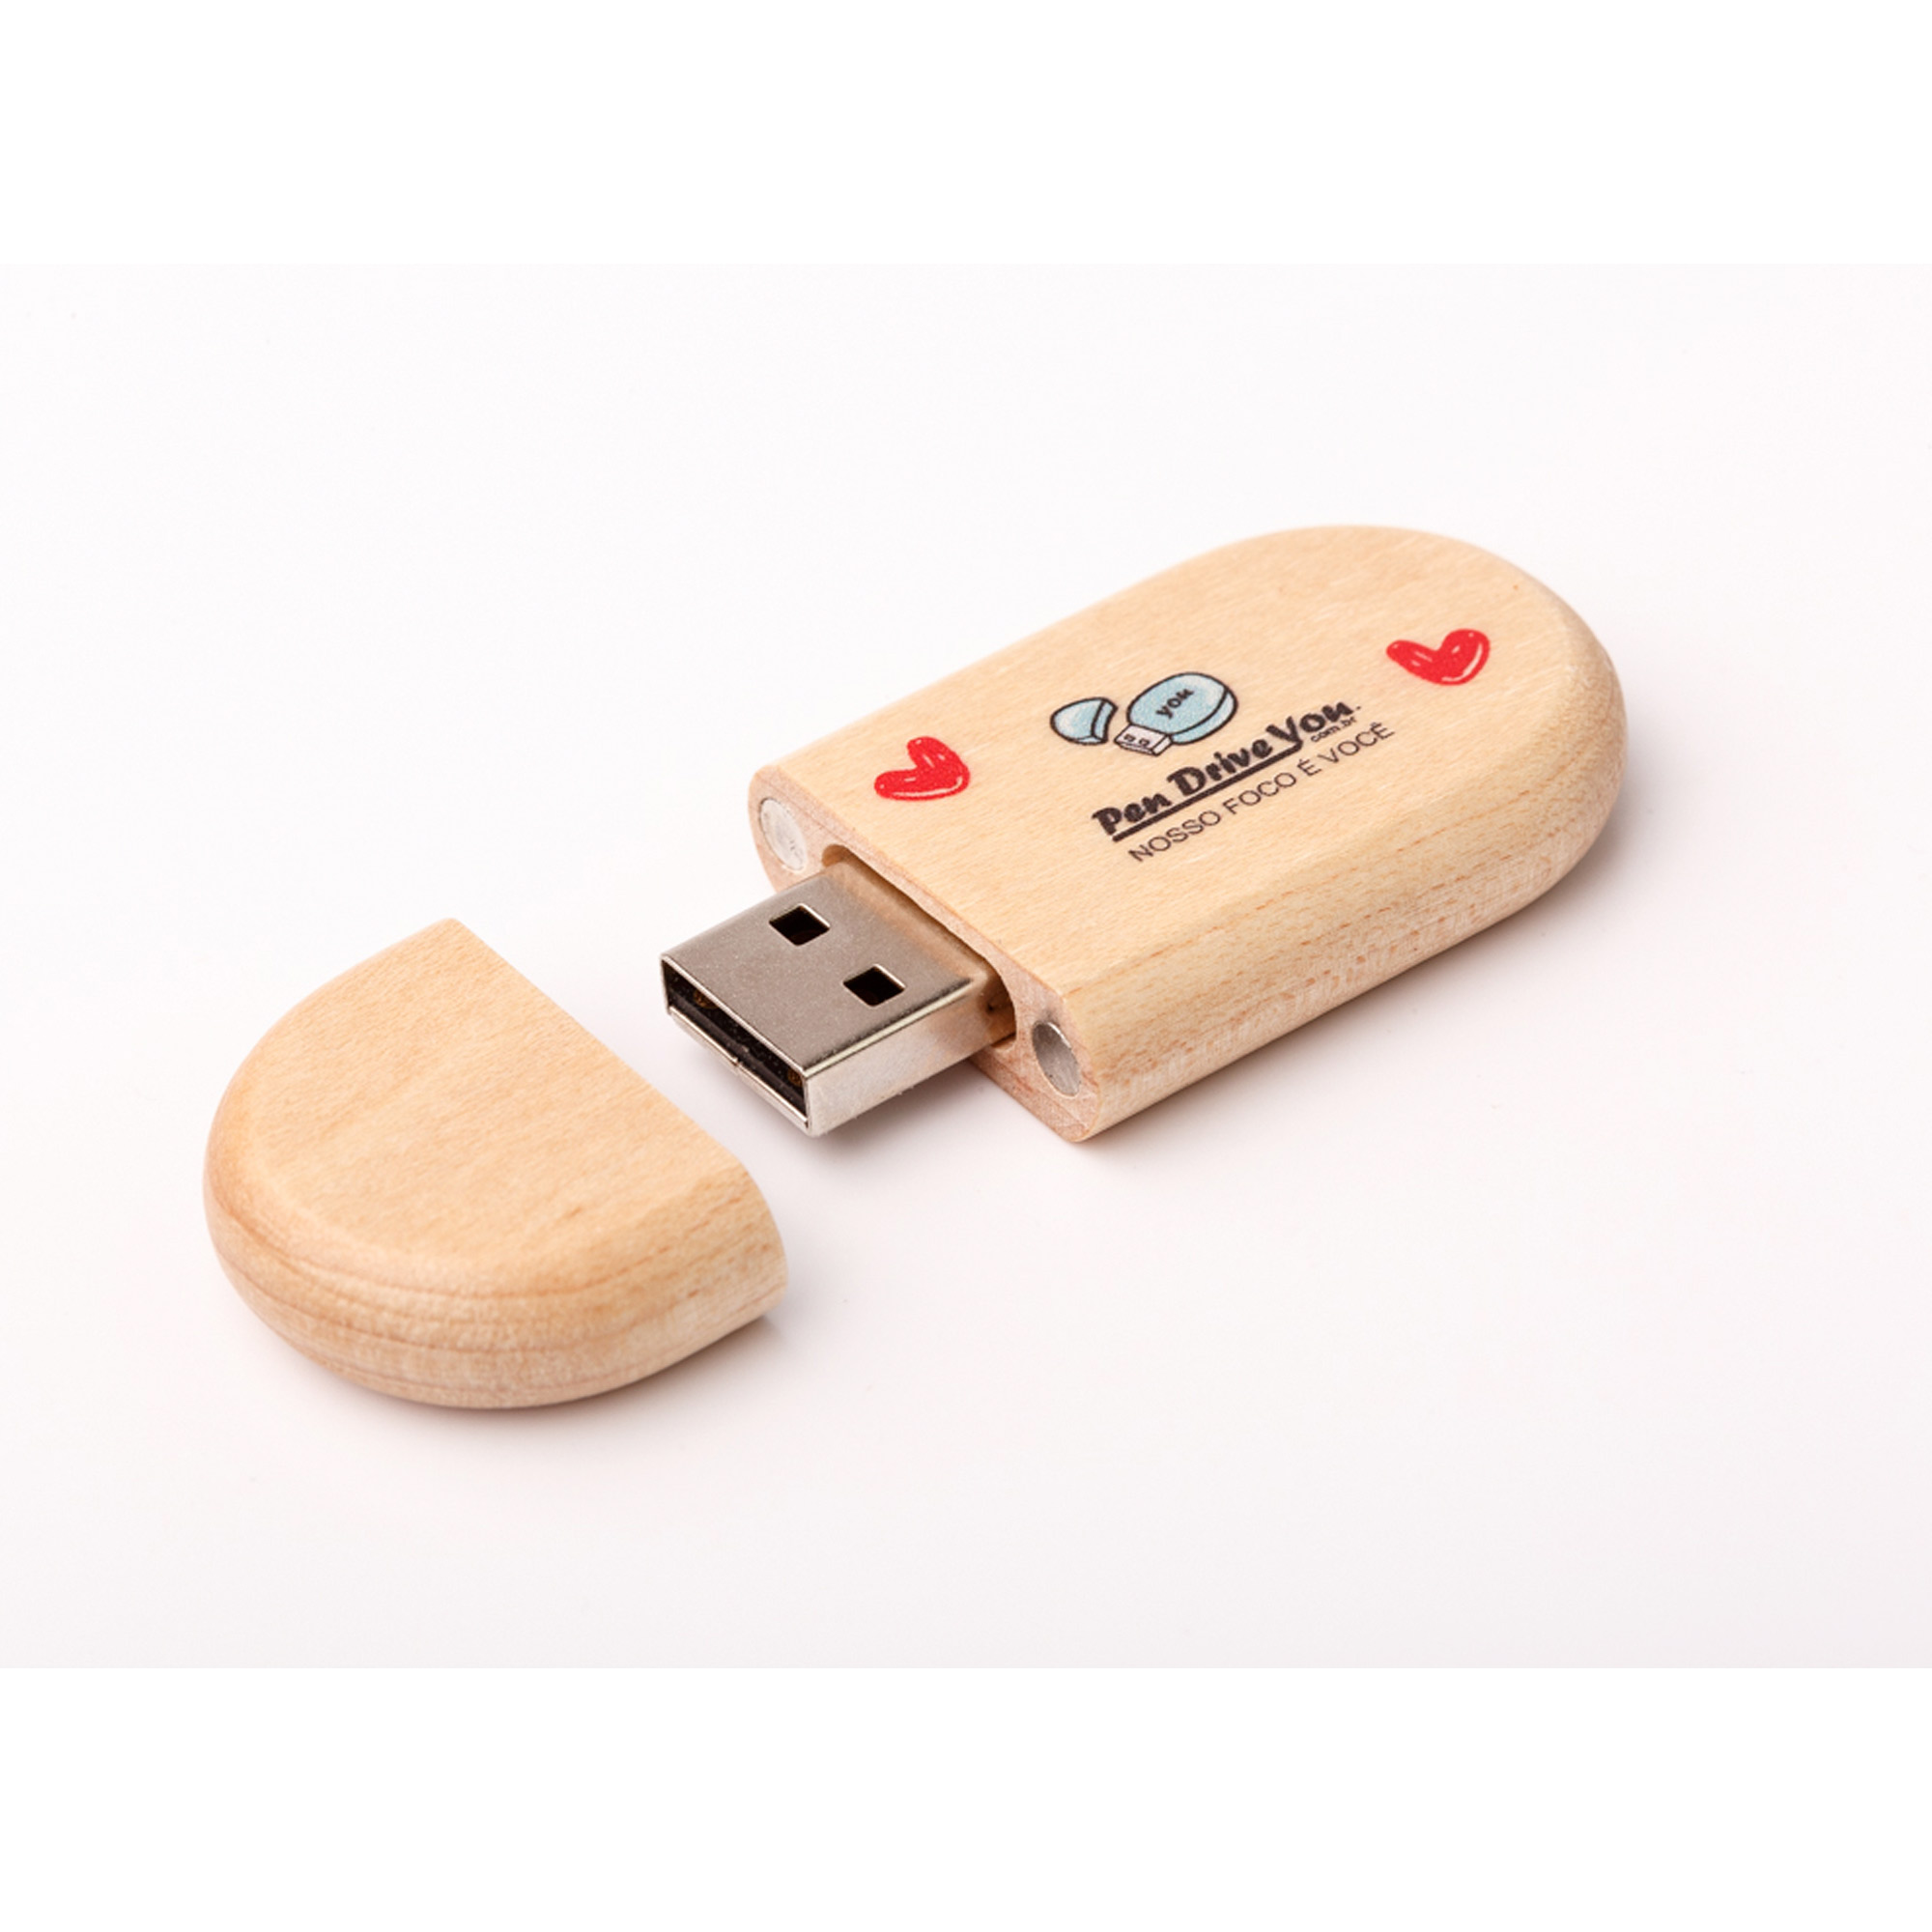 Pen Drive Oval Madeira Maple com Tampa  - Pen Drive You